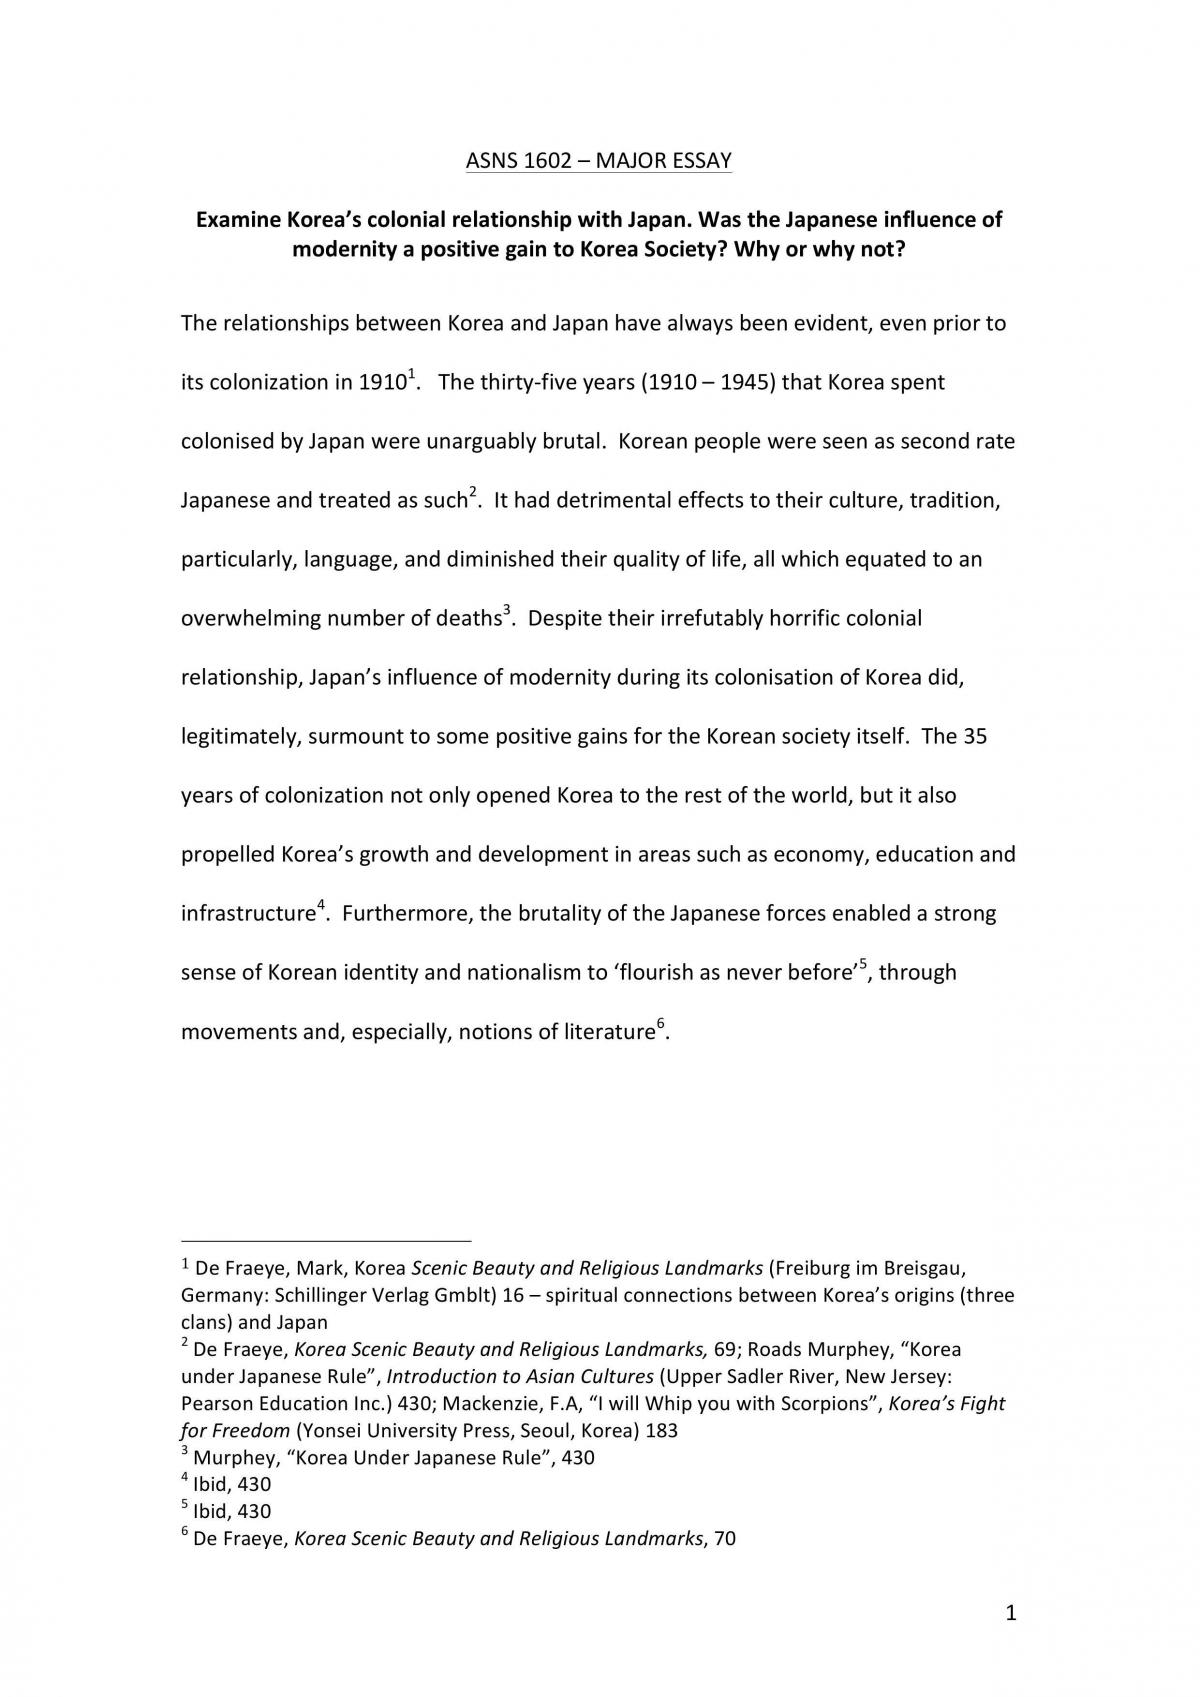 Examination of Korea's Colonial Relationship with Japan. - Page 1